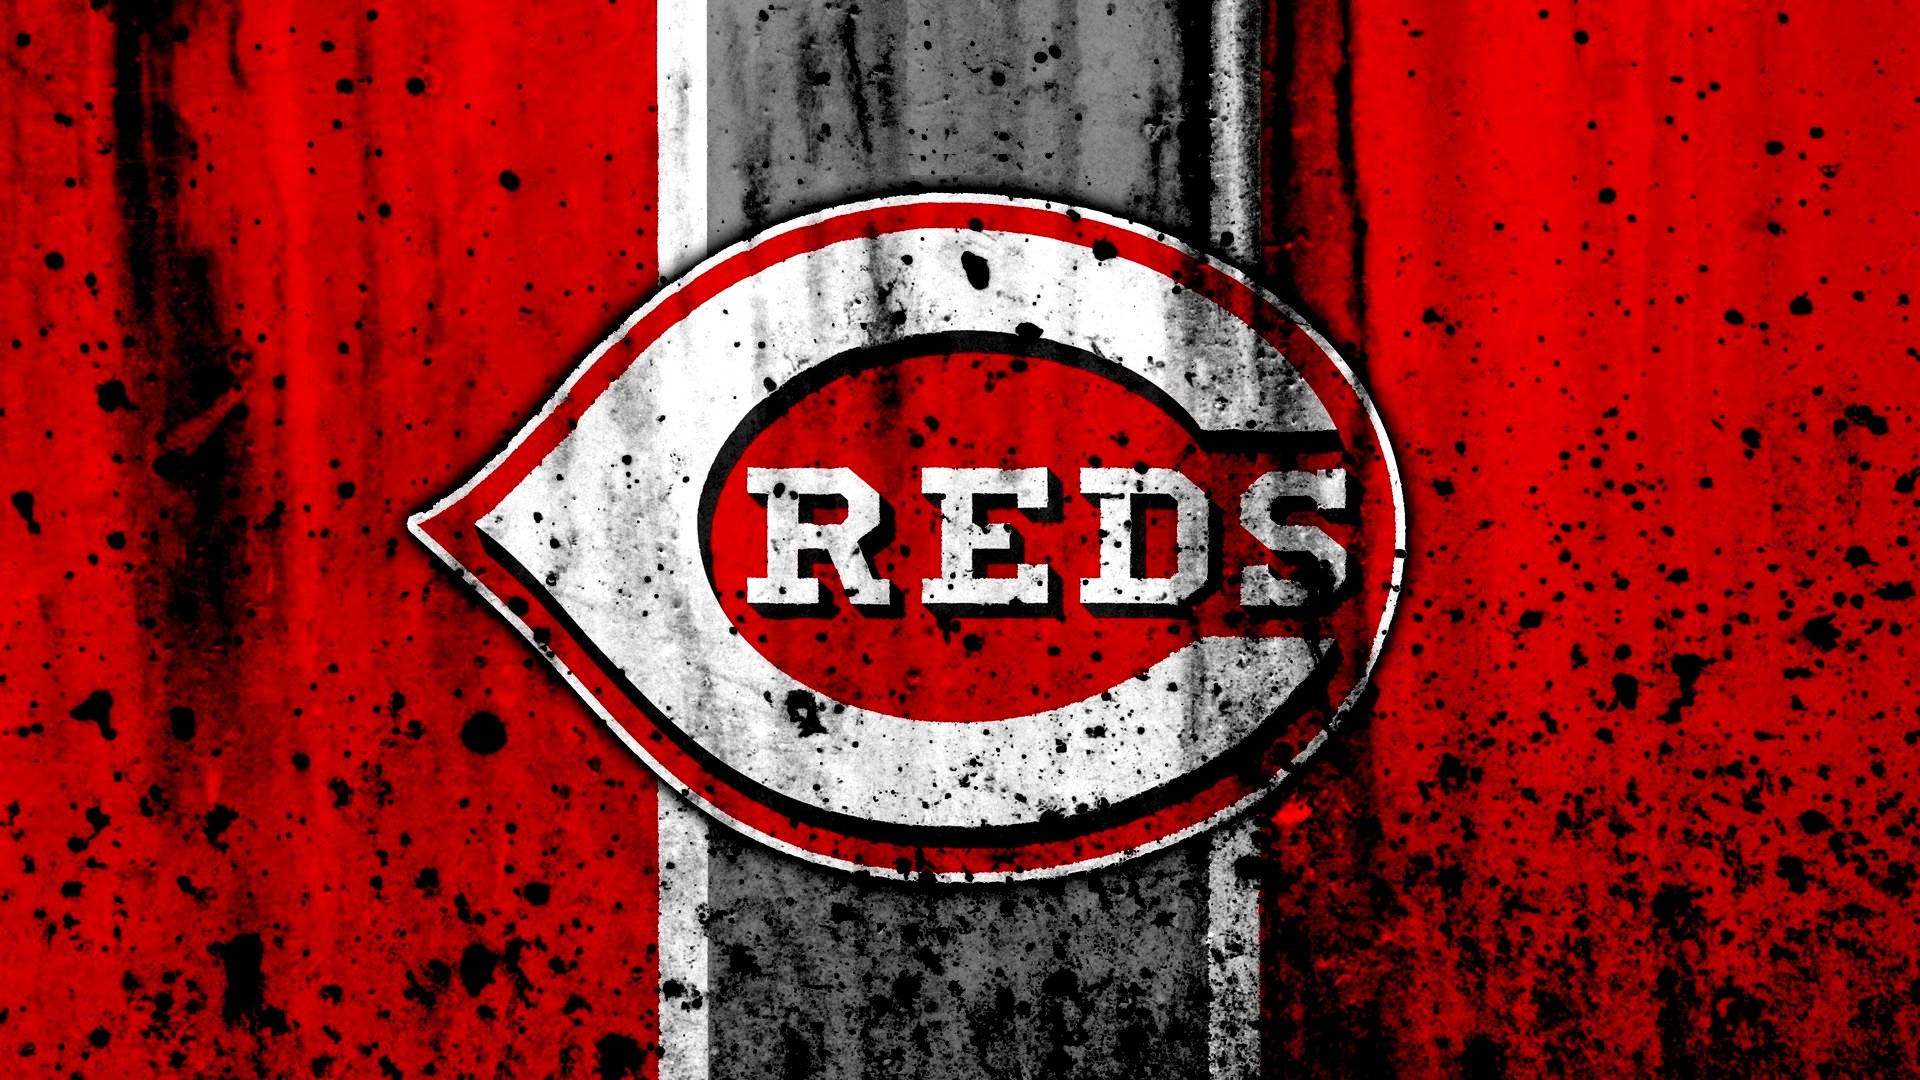 Cincinnati Reds HD Wallpapers with high-resolution 1920x1080 pixel. You can use this wallpaper for Mac Desktop Wallpaper, Laptop Screensavers, Android Wallpapers, Tablet or iPhone Home Screen and another mobile phone device